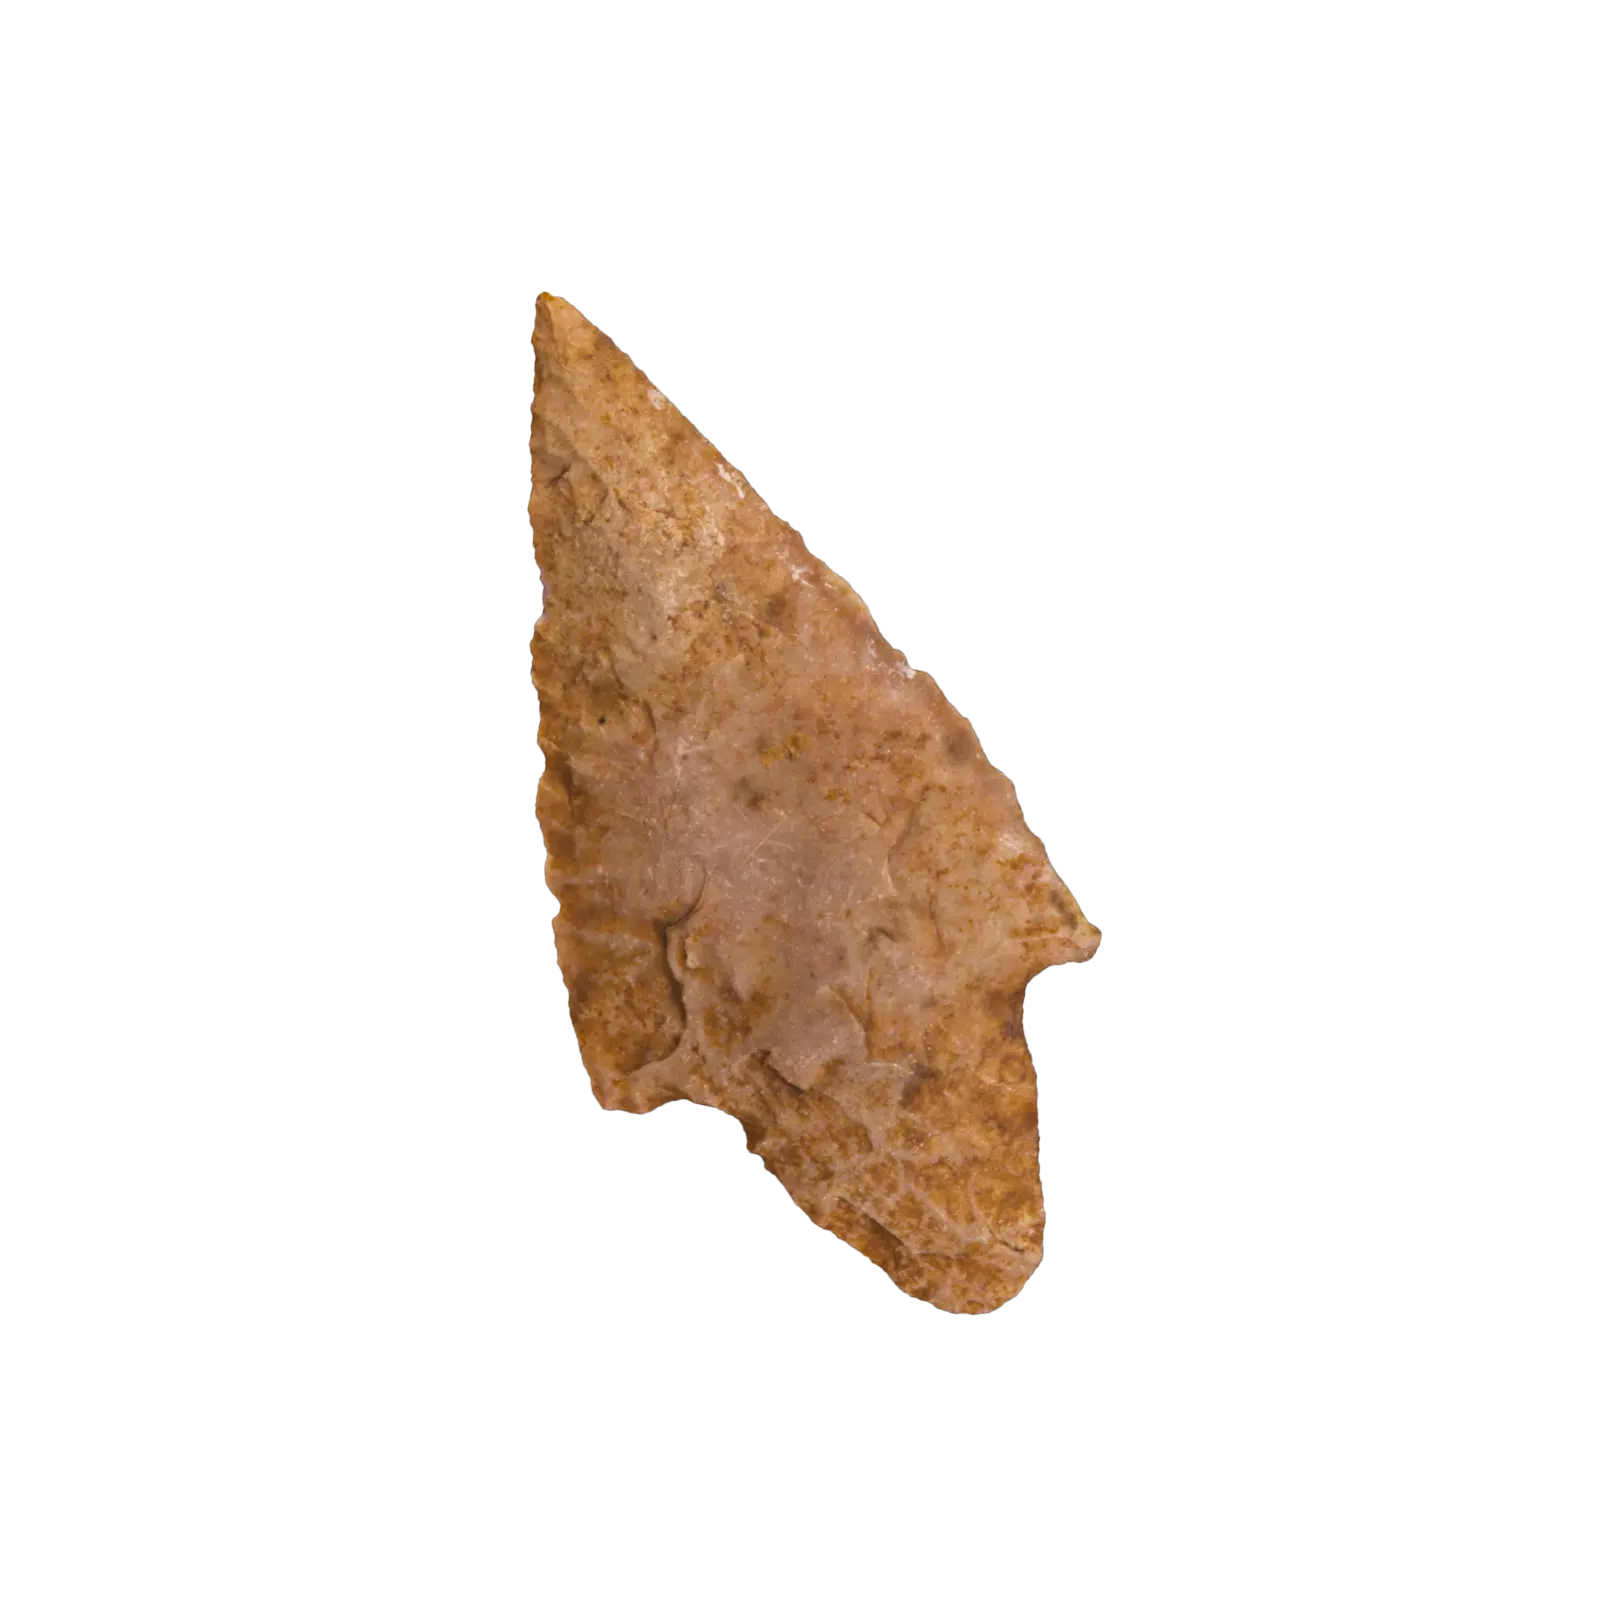 Photo of an ancient chert arrowhead (Later Neolithic), whose shape resembles today's computer cursors with its triangular and pointy shape.